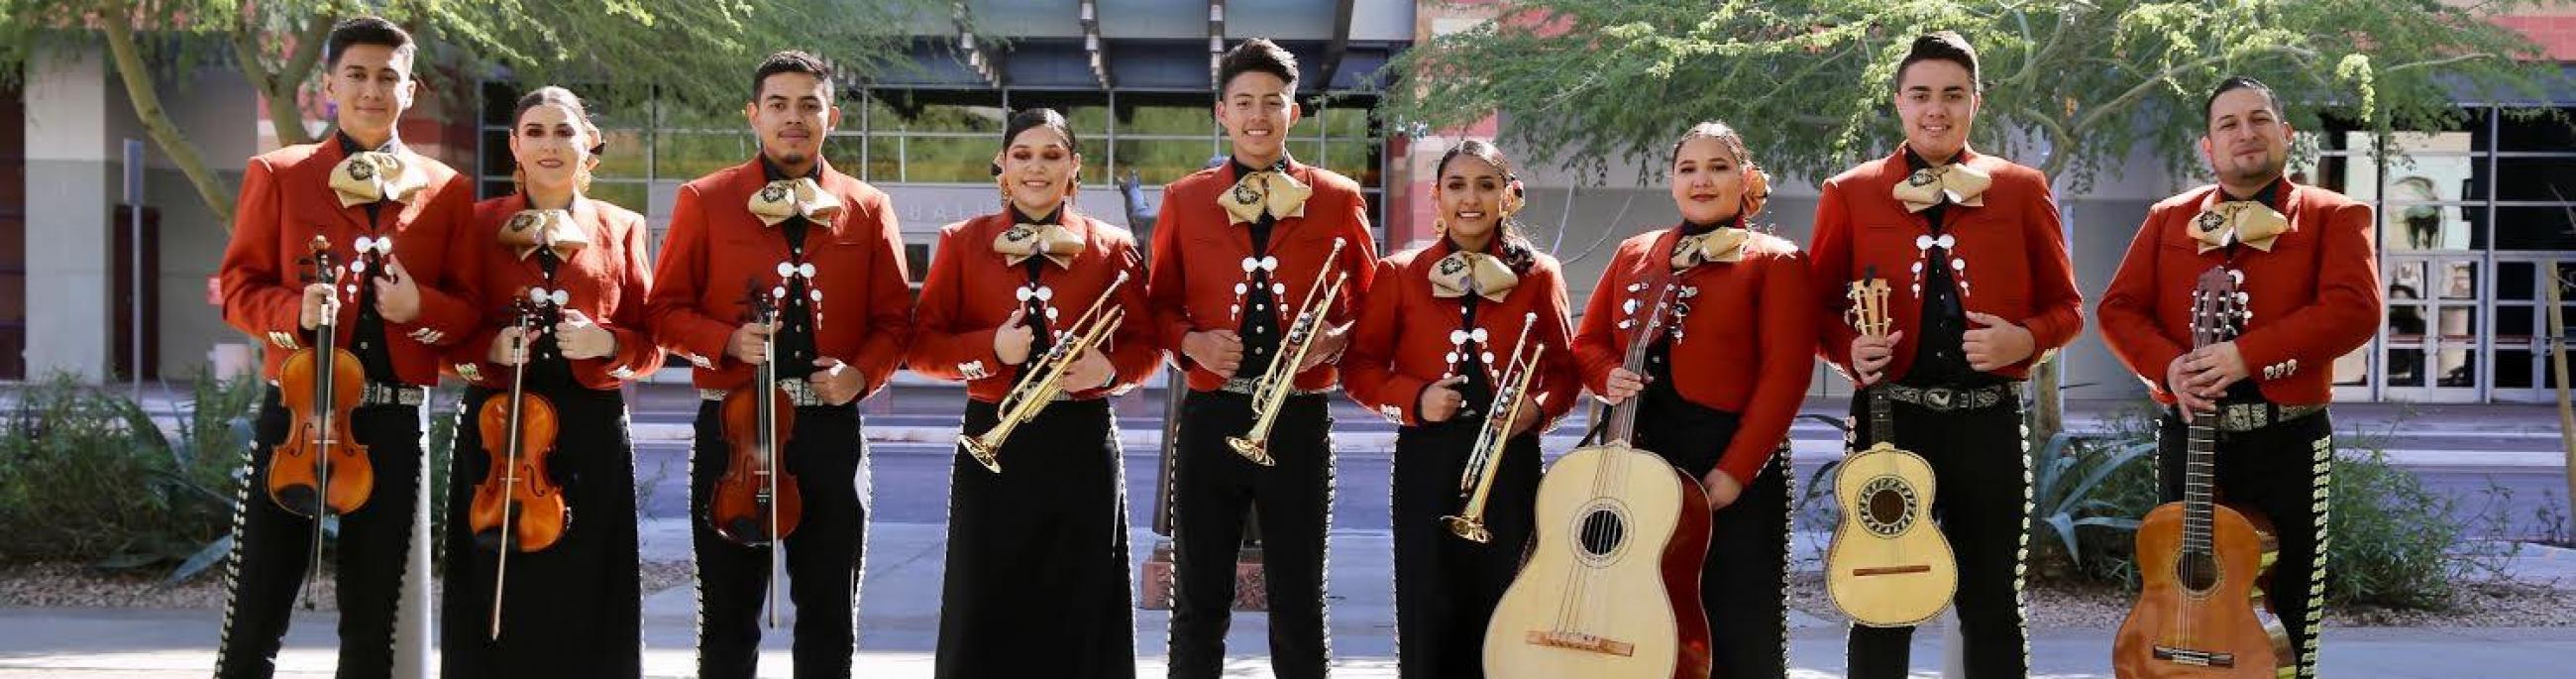 Mariachi Corazon del Valle pose outdoors with their instruments.